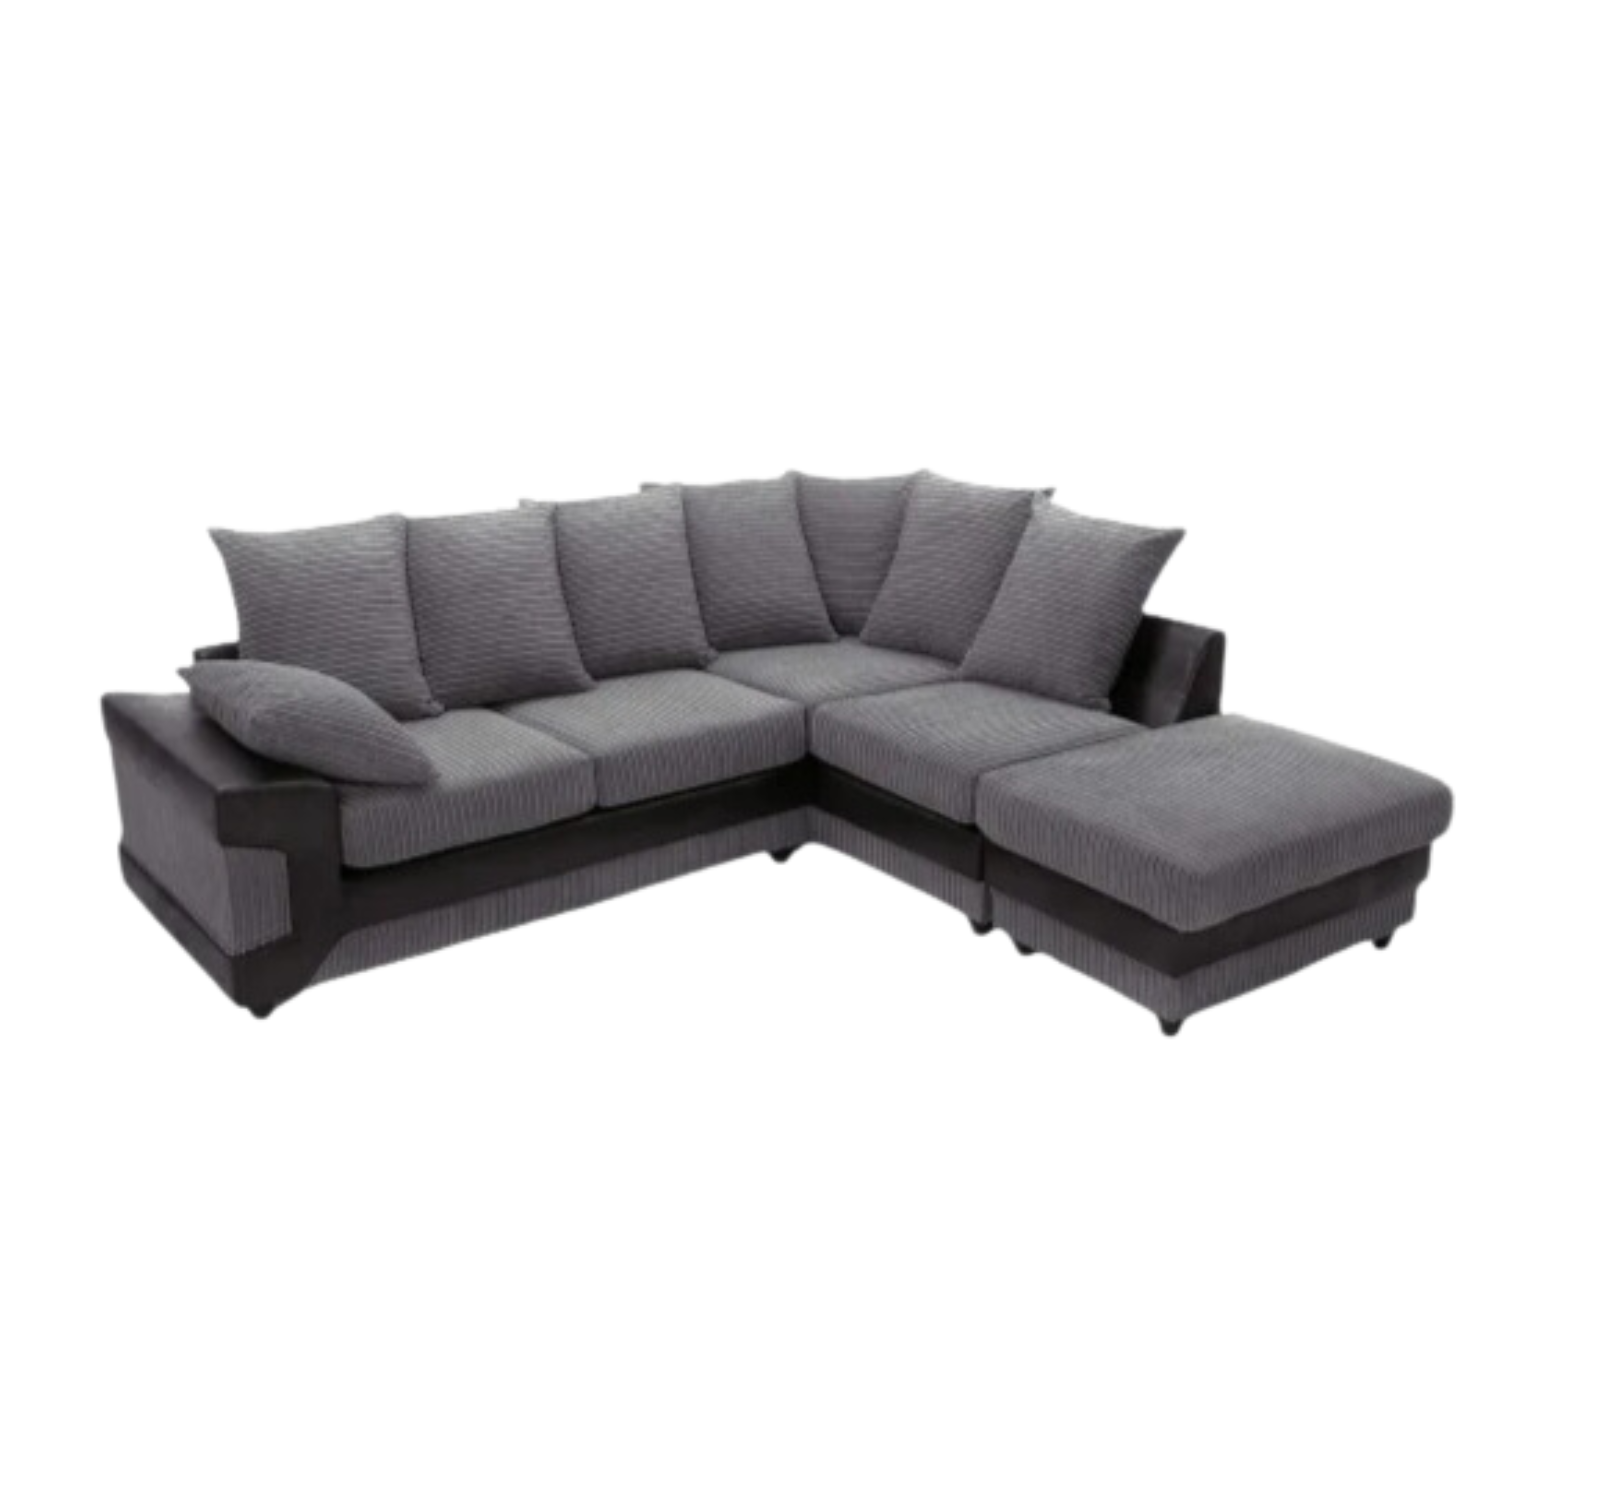 Dino 5-Seater Corner Sofa, Relaxation in Every Corner (Scatter Back)